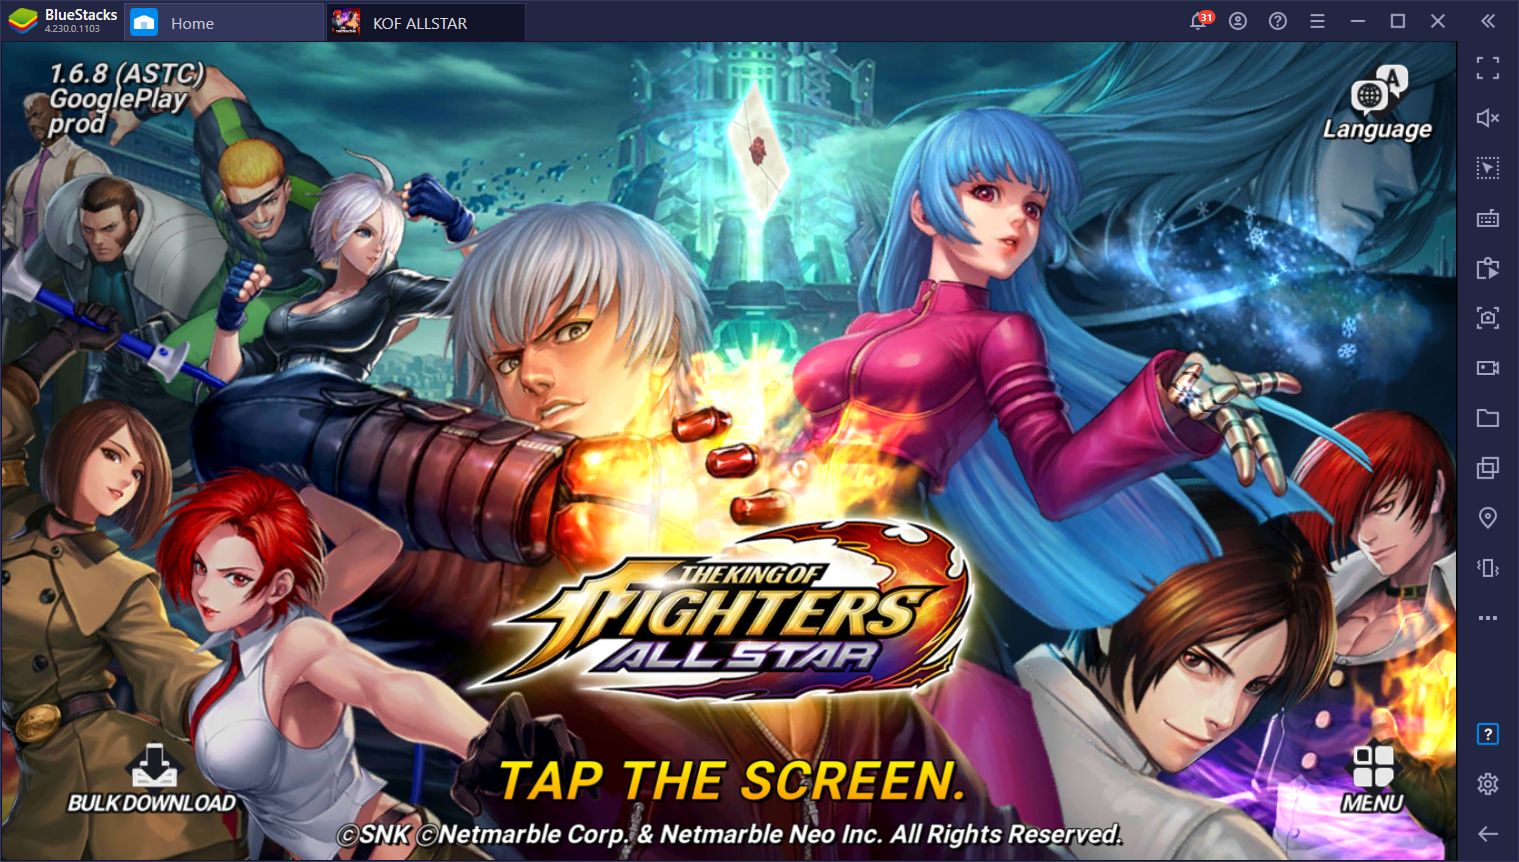 King of Fighters ALLSTAR August Update - New Challenges, Dungeons, and Rewards